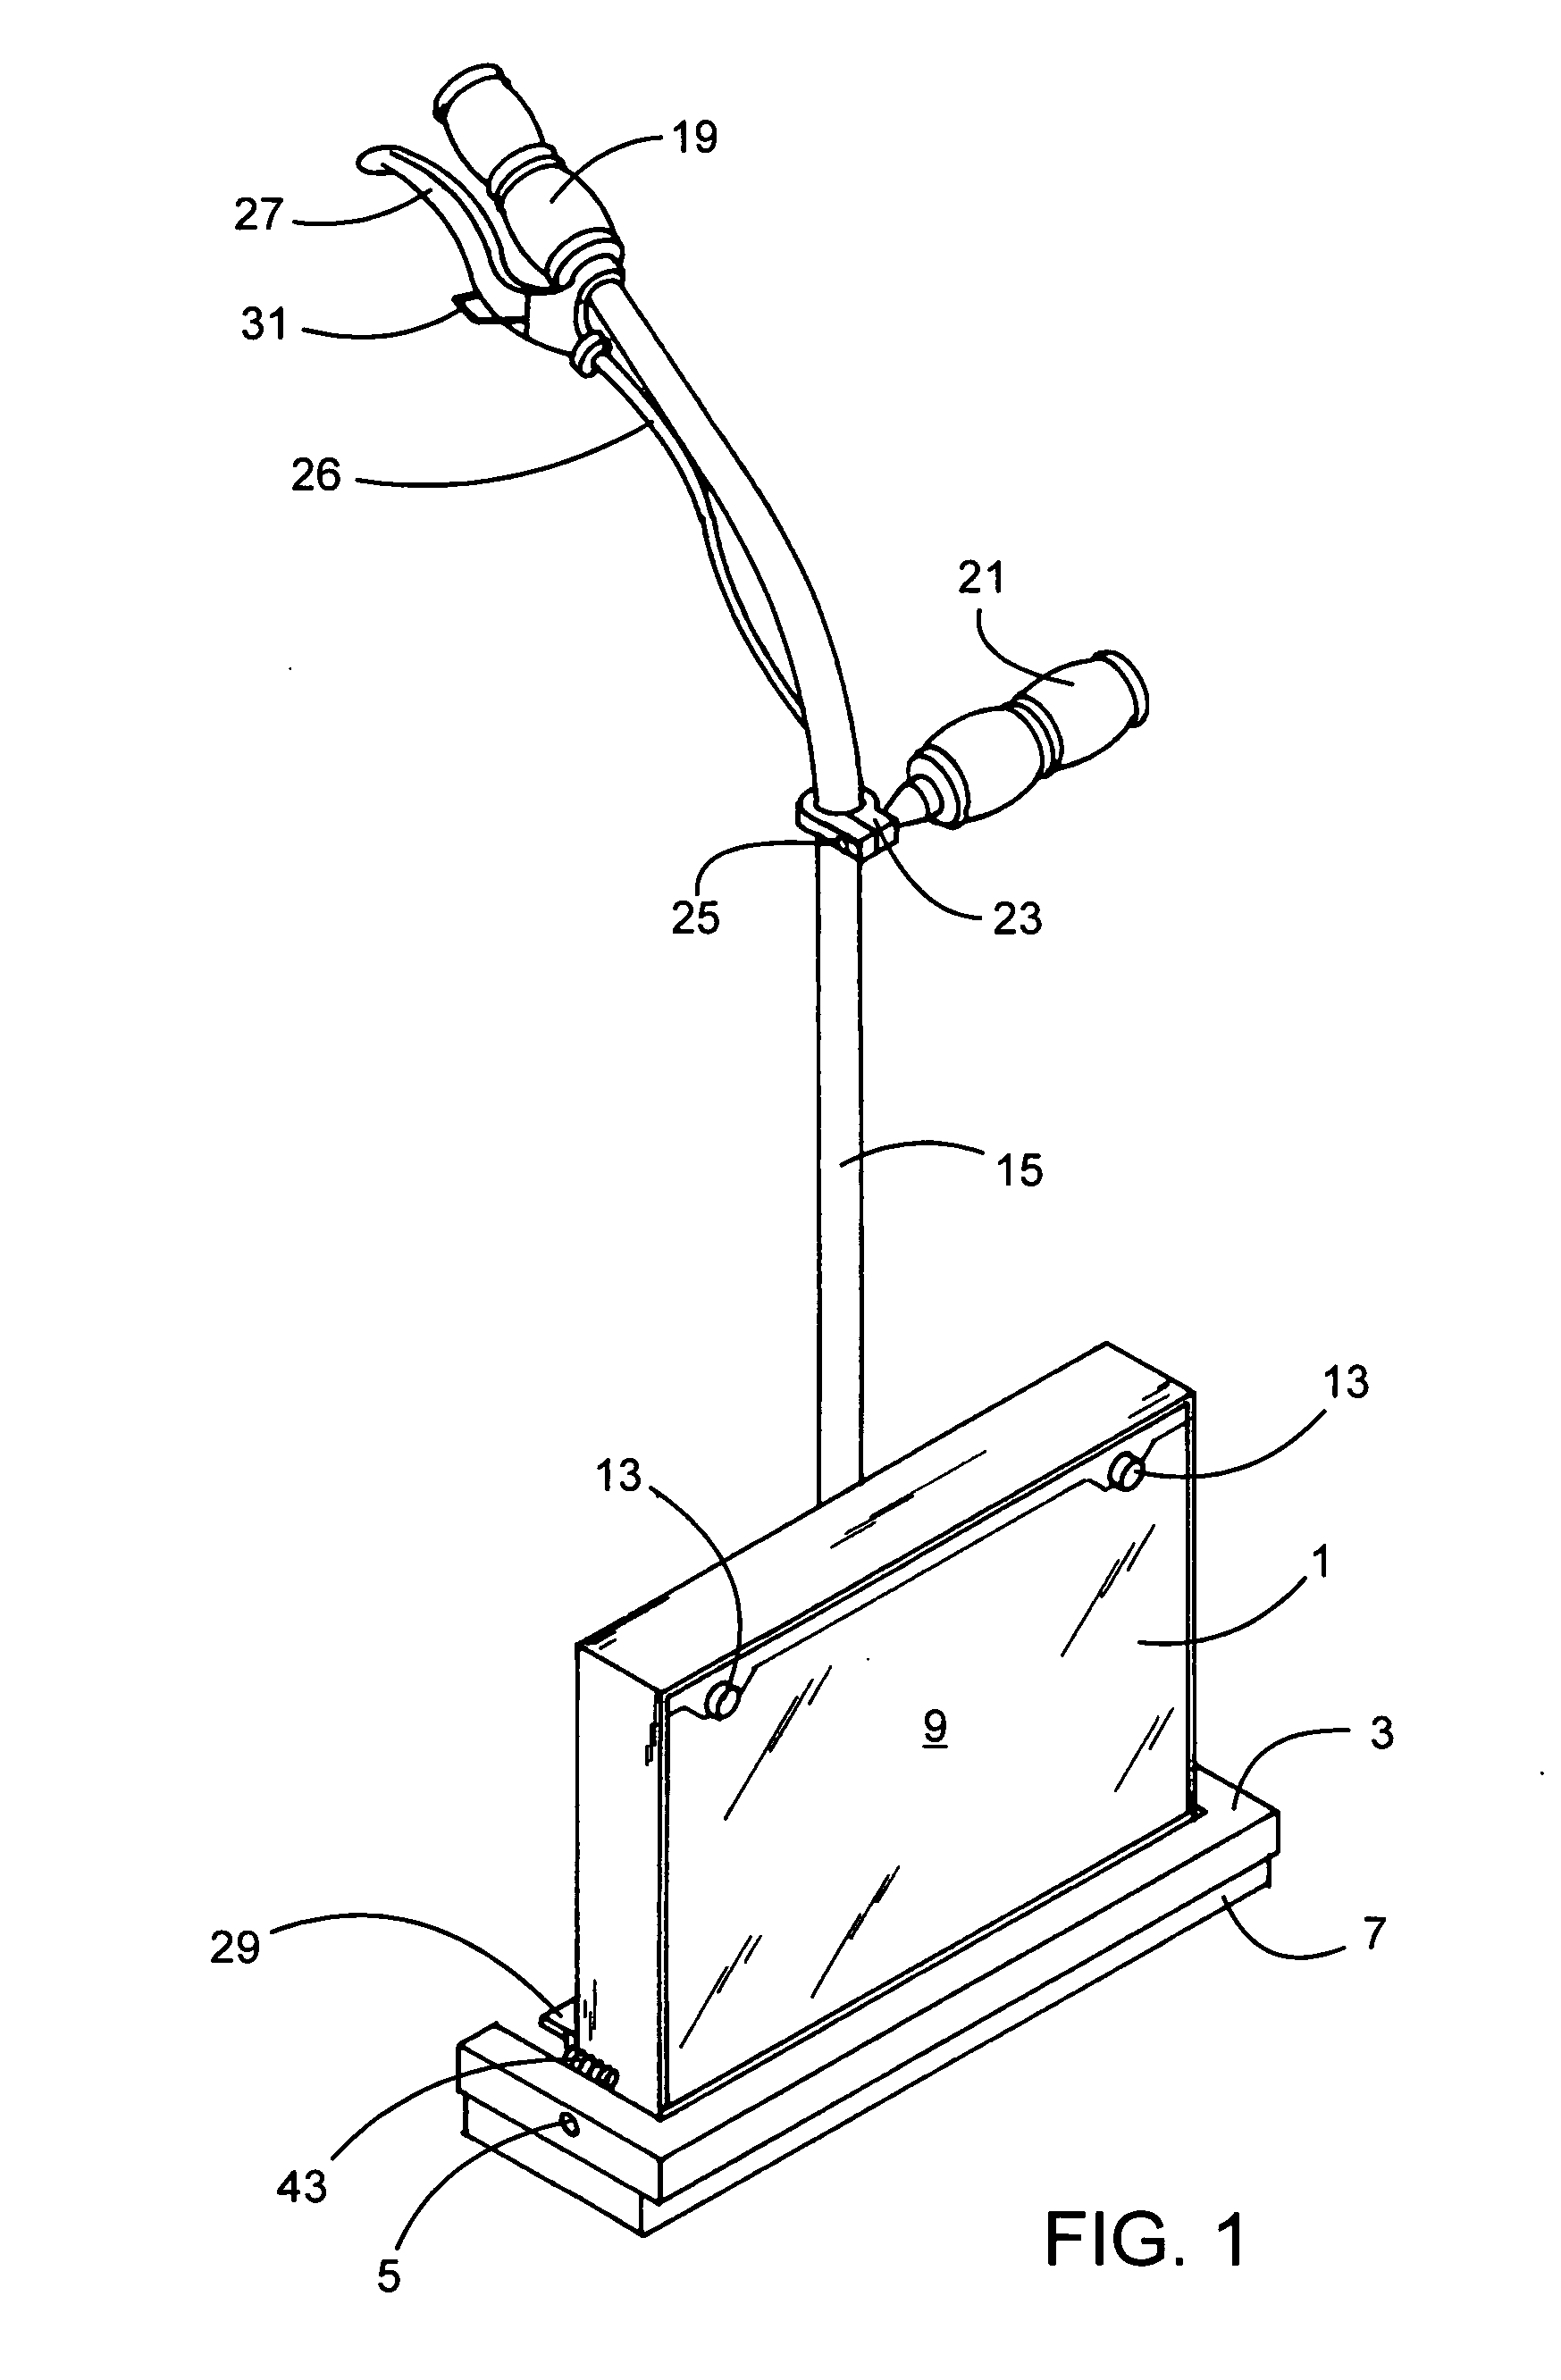 Spreading apparatus for flowable materials